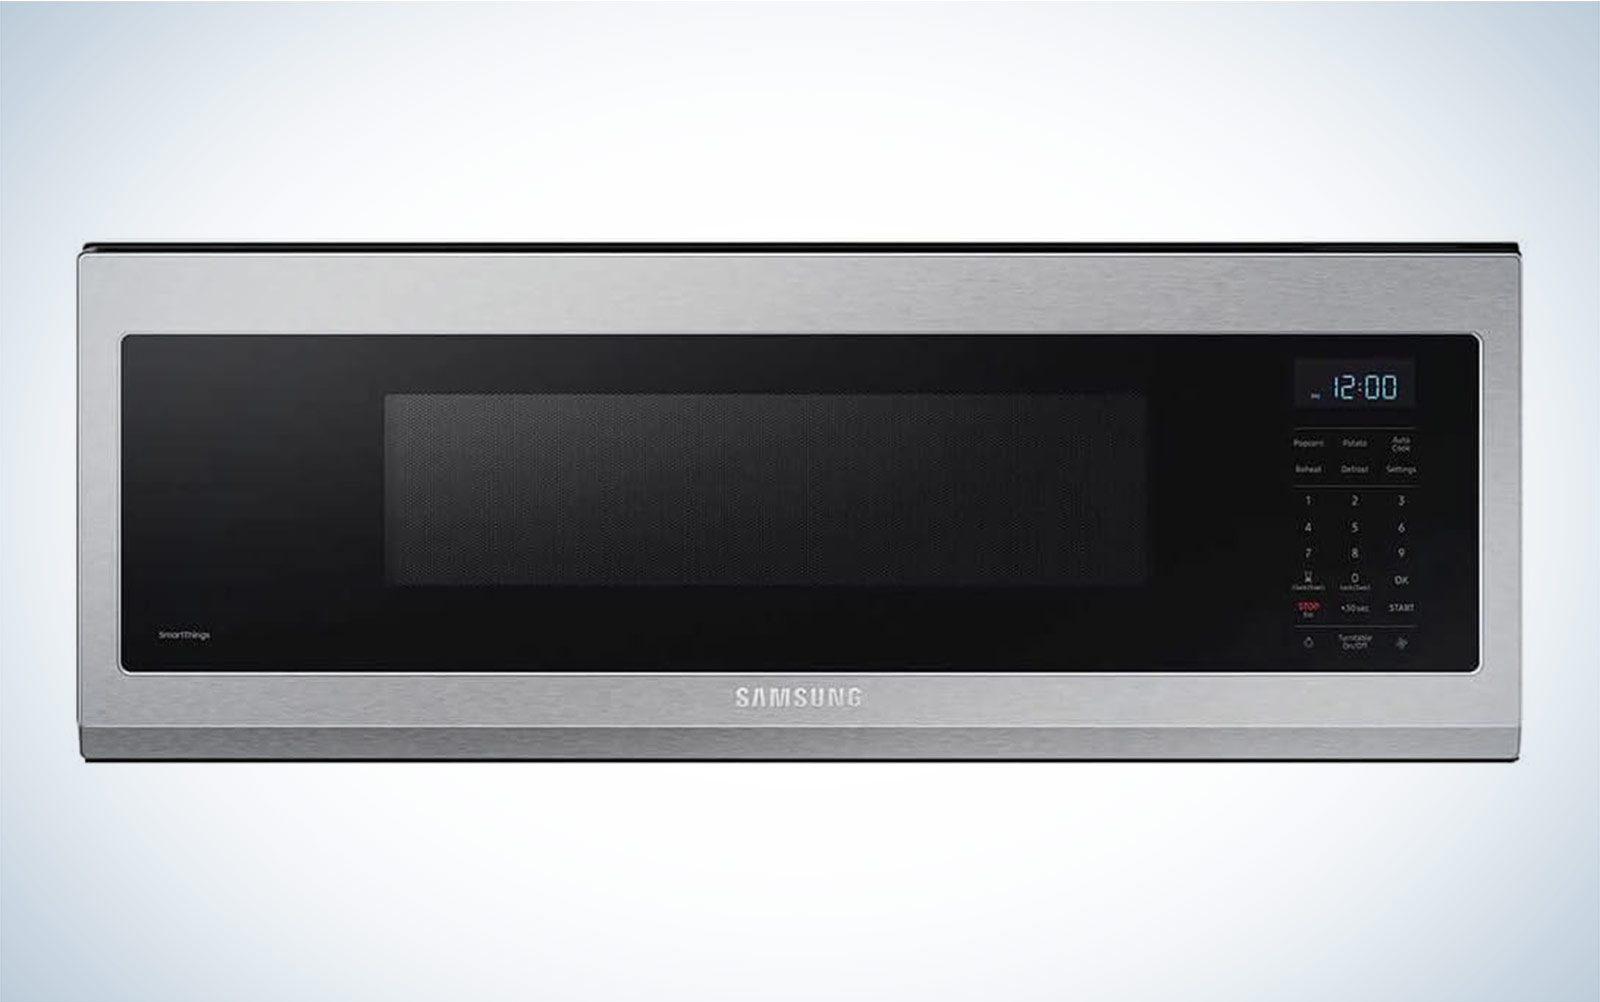 Samsung ME11A7510DS microwave